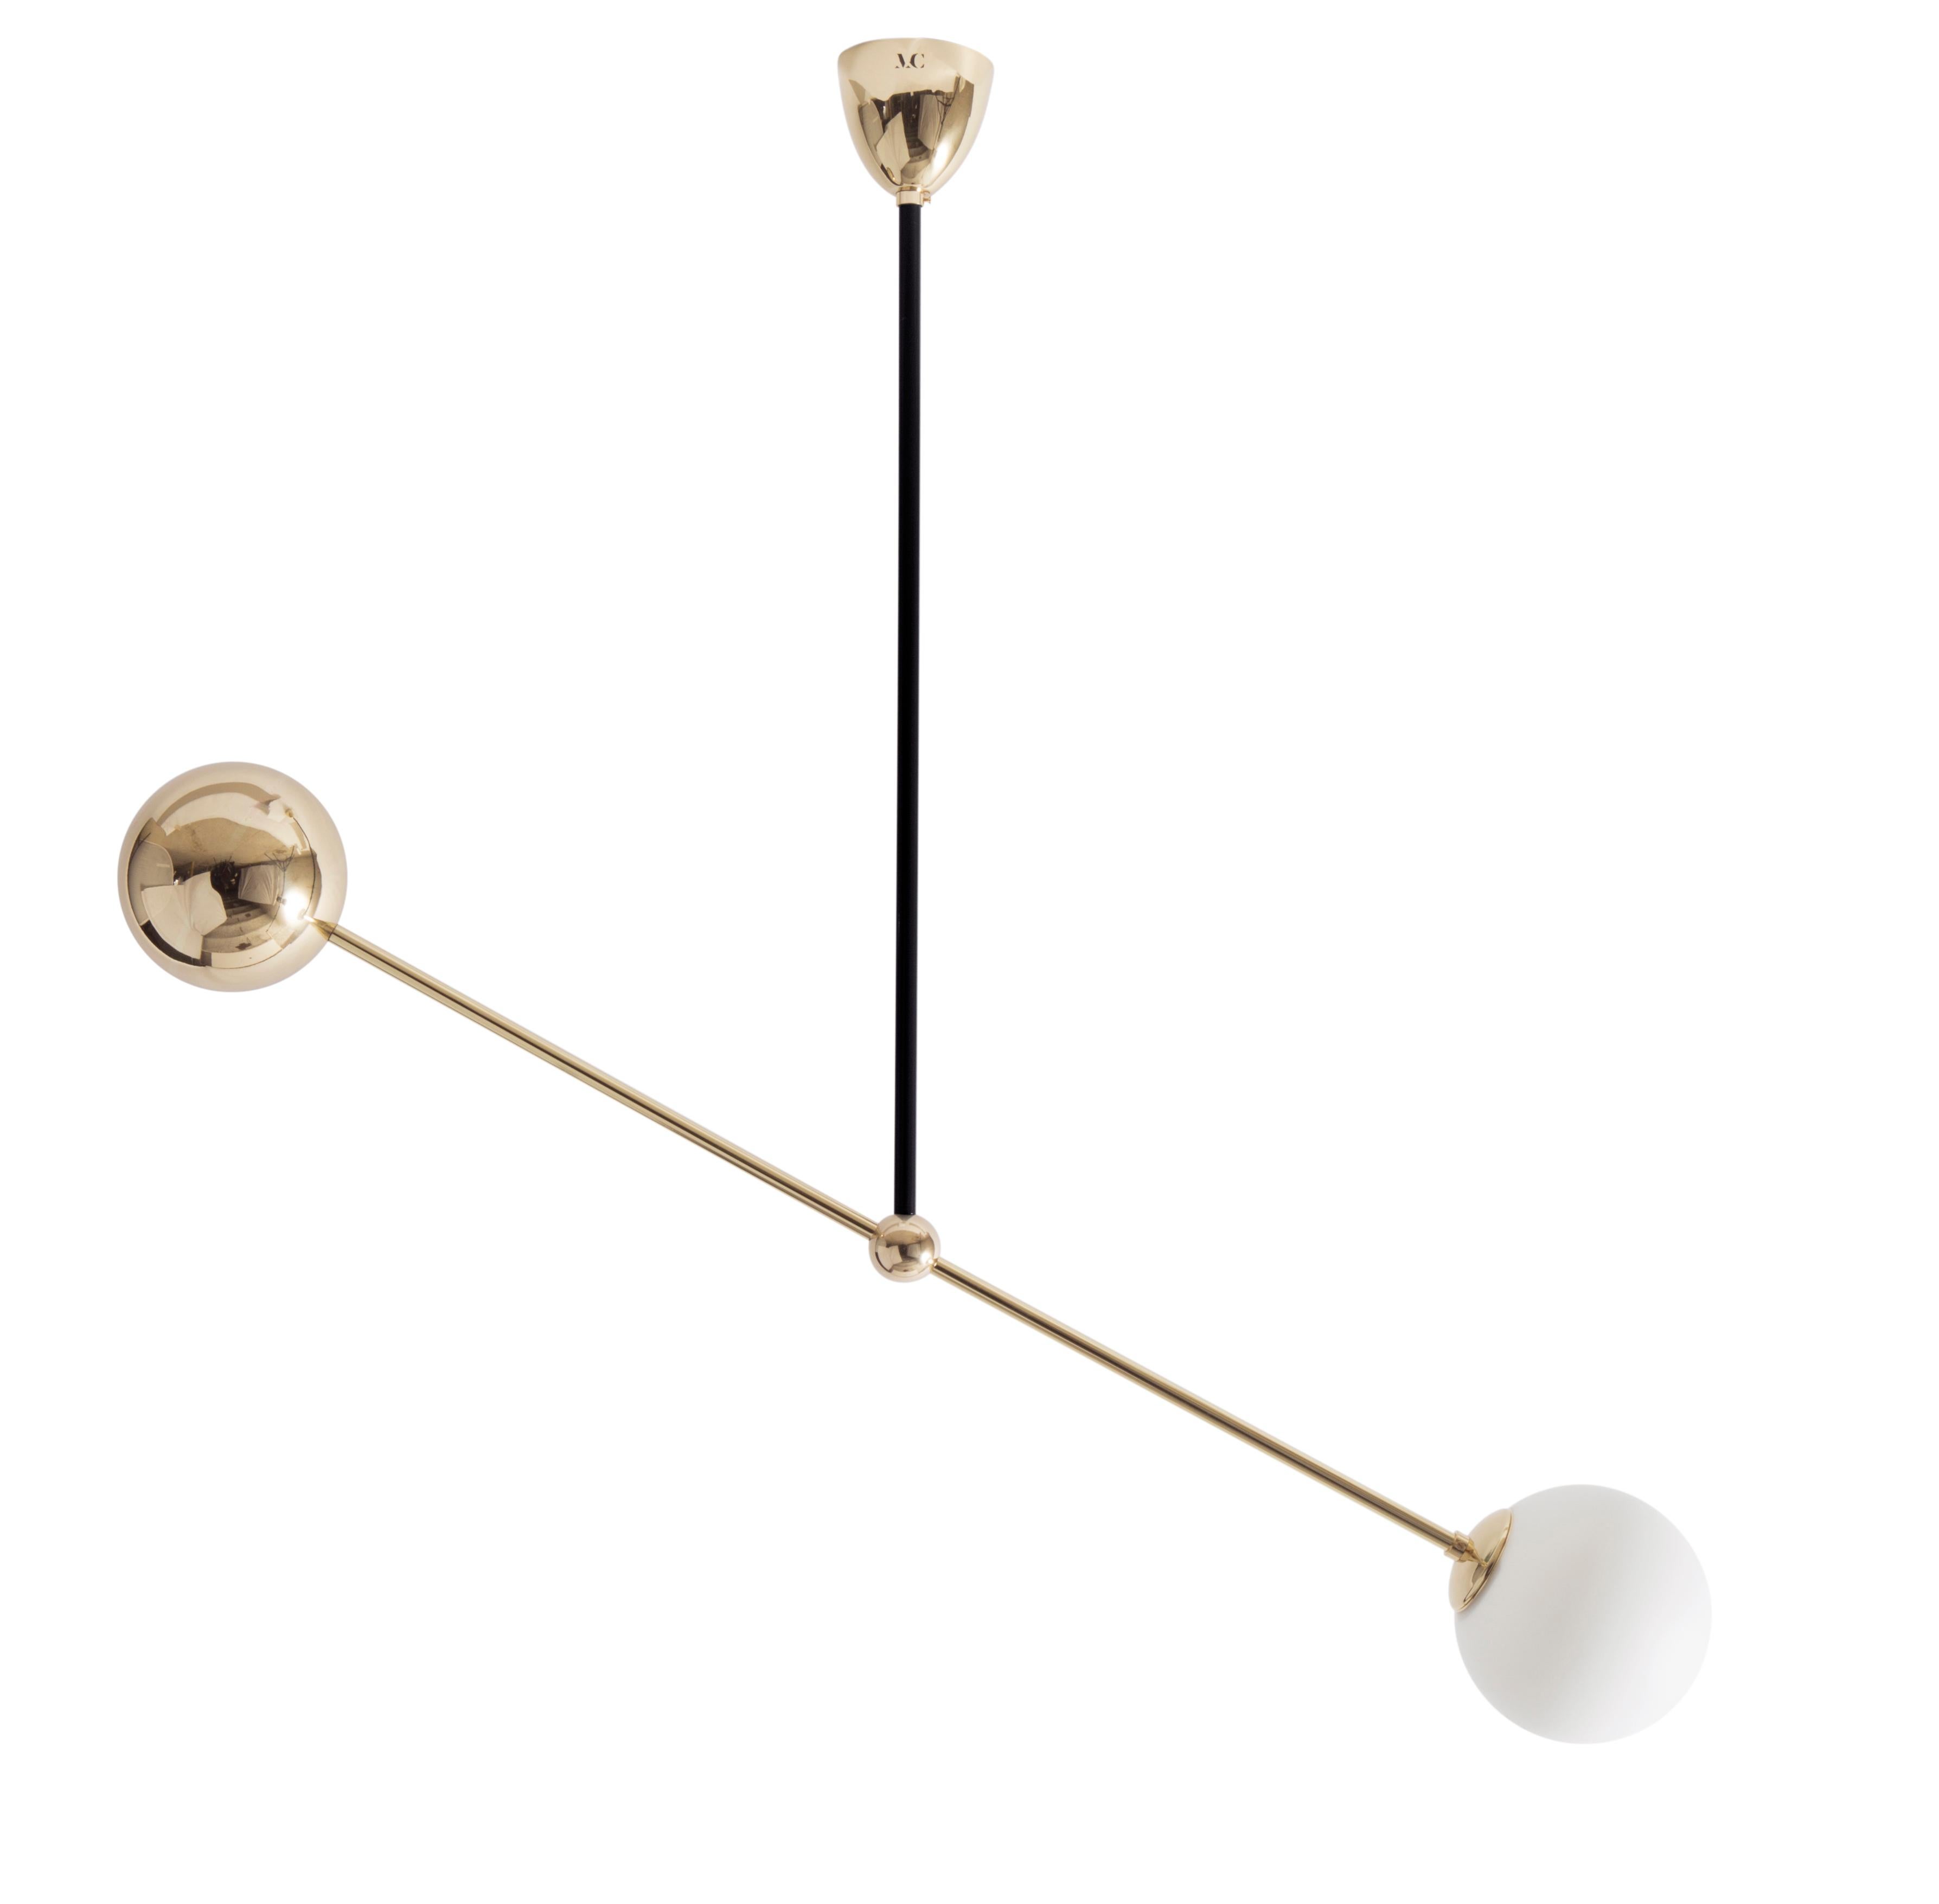 Chandelier 03 by Magic Circus Editions
Dimensions: W 111 x H 120 cm, also available in H 170, 220
Materials: Brass, mouth blown glass

All our lamps can be wired according to each country. If sold to the USA it will be wired for the USA for